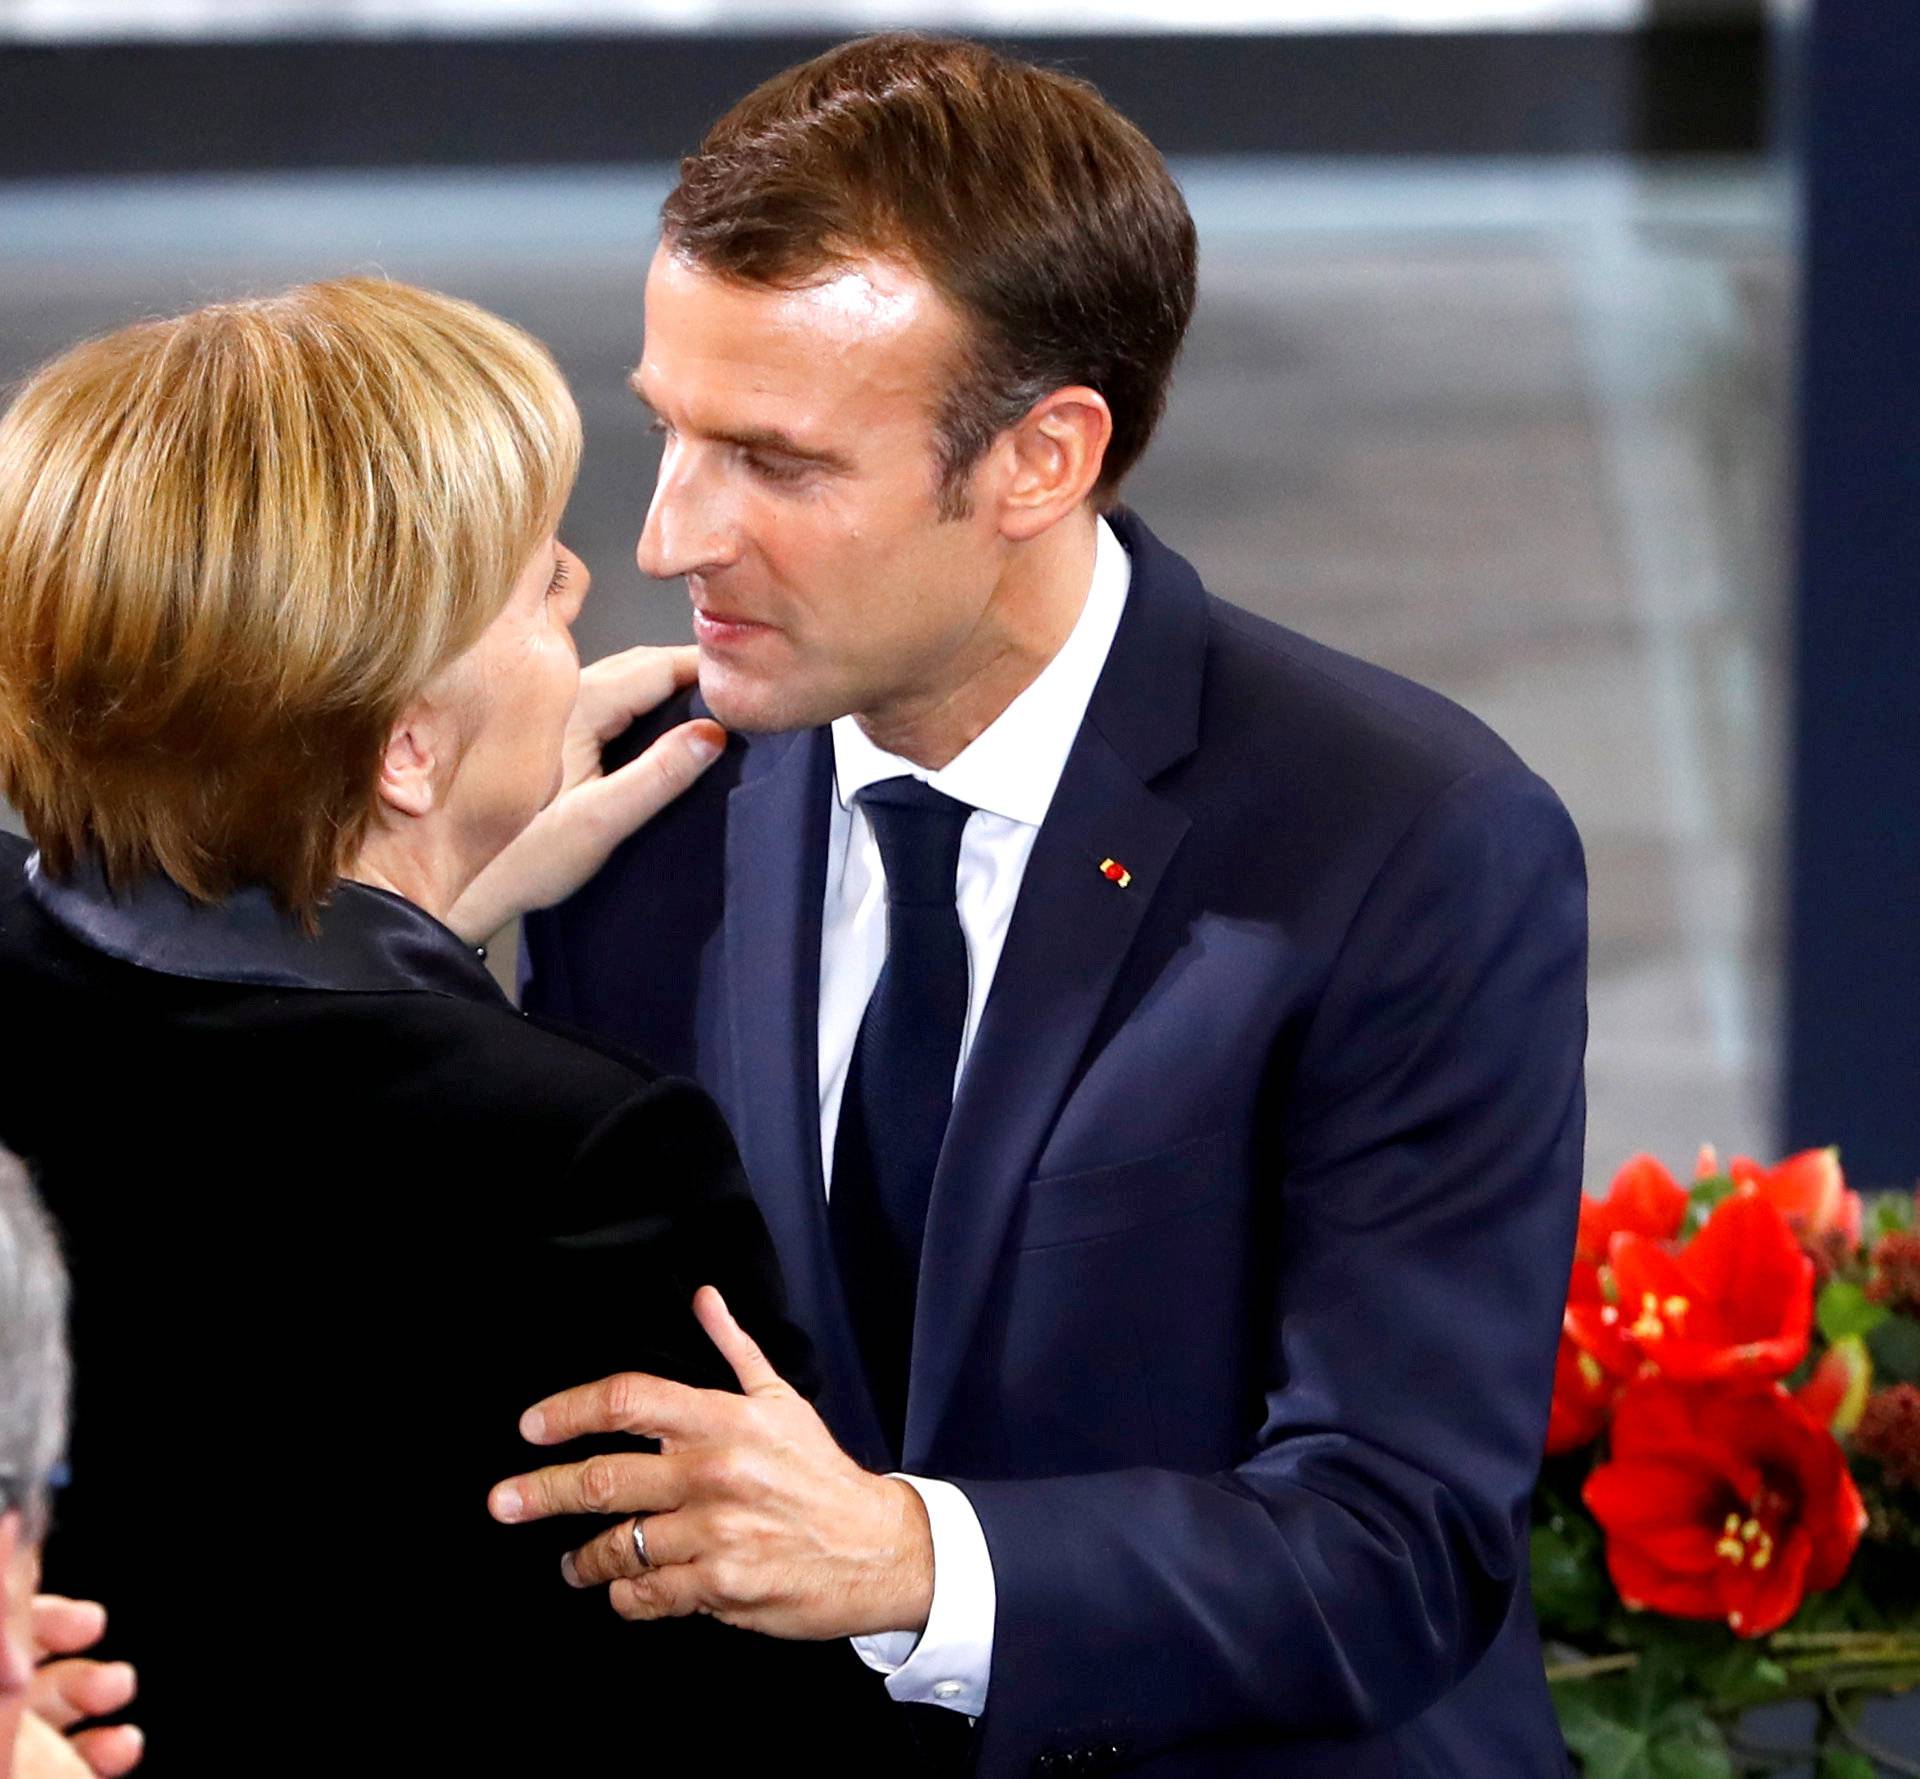 French President Emmanuel Macron hugs German Chancellor Angela Merkel after giving a speech during a ceremony at the lower house of parliament Bundestag in the Reichstag building in Berlin to mark National Mourning Day